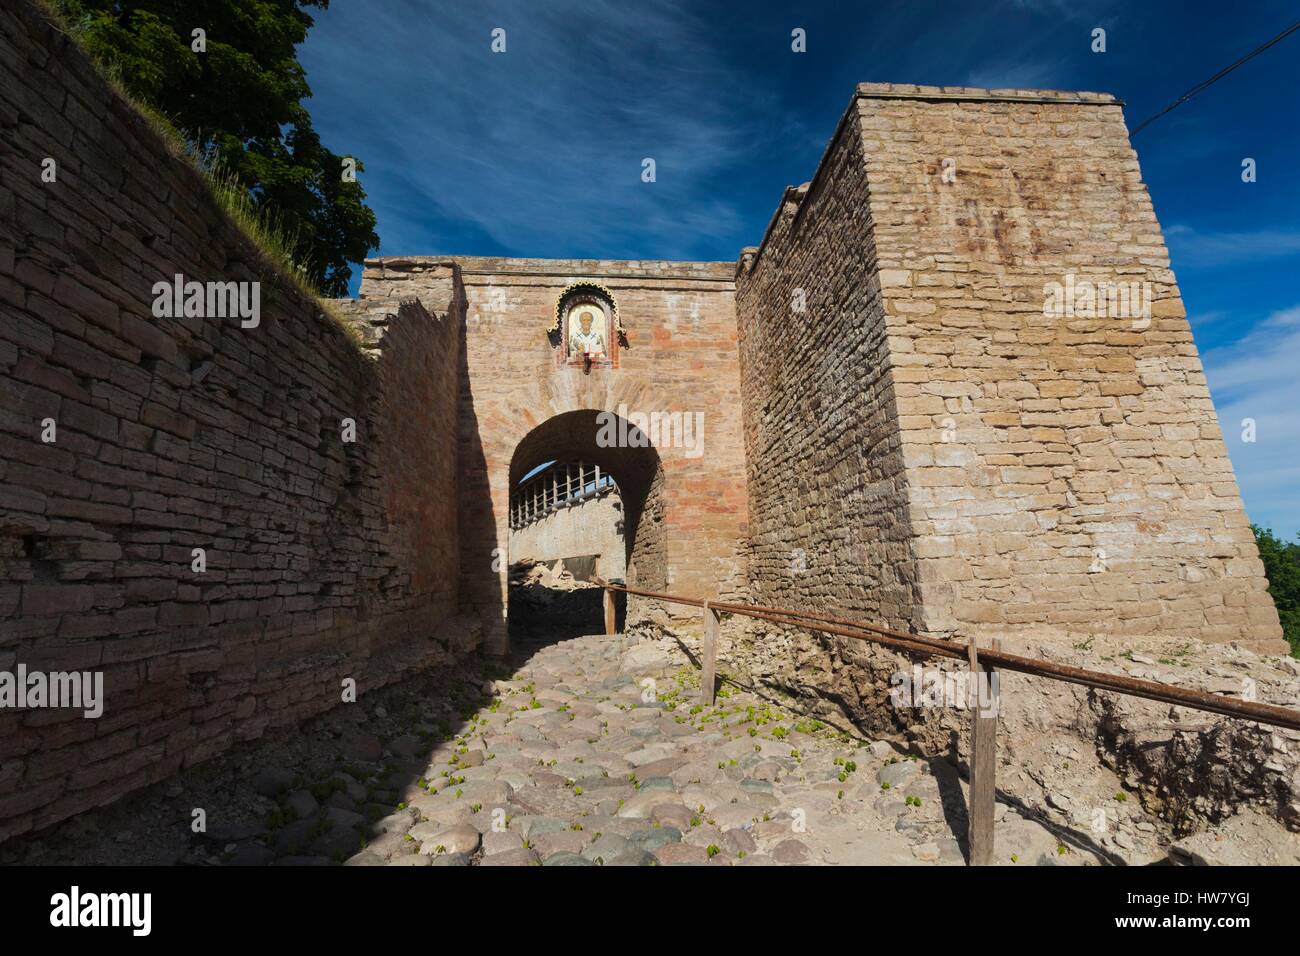 Russia, Pskovskaya Oblast, Stary Izborsk, ruins of the oldest stone fortress in Russia Stock Photo